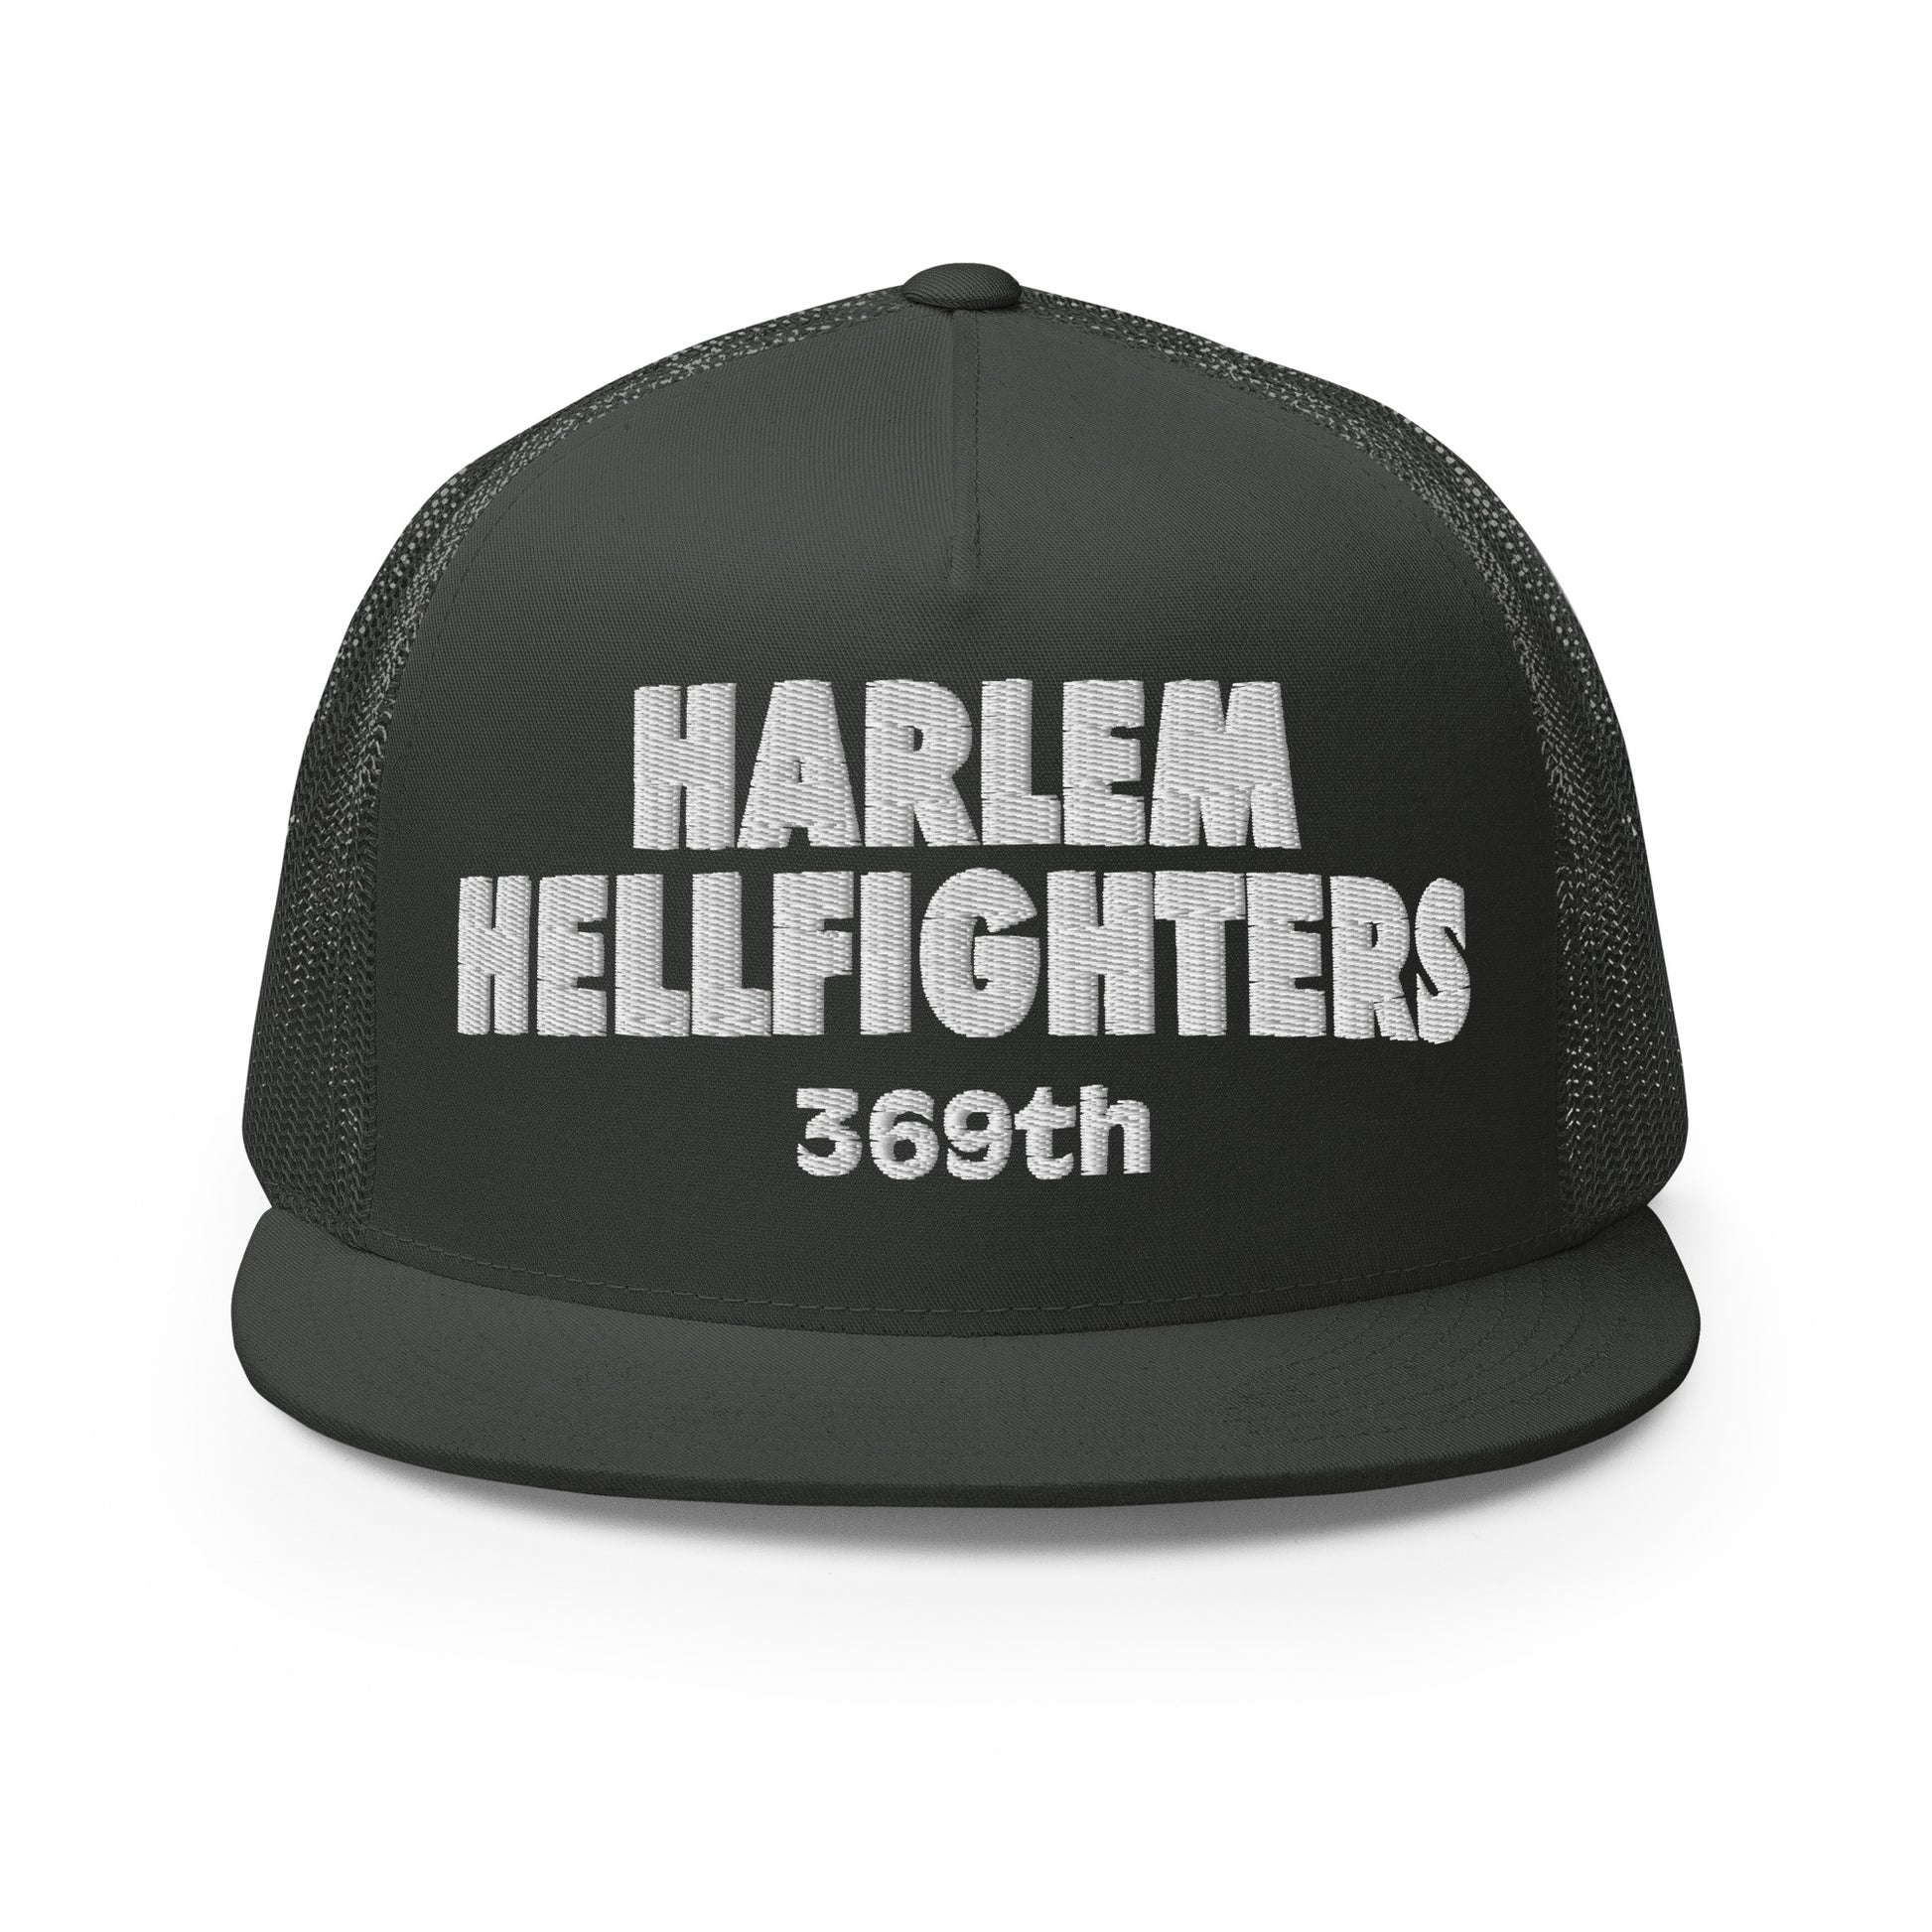 grey trucker hat with harlem hellfighters 369th embroidery